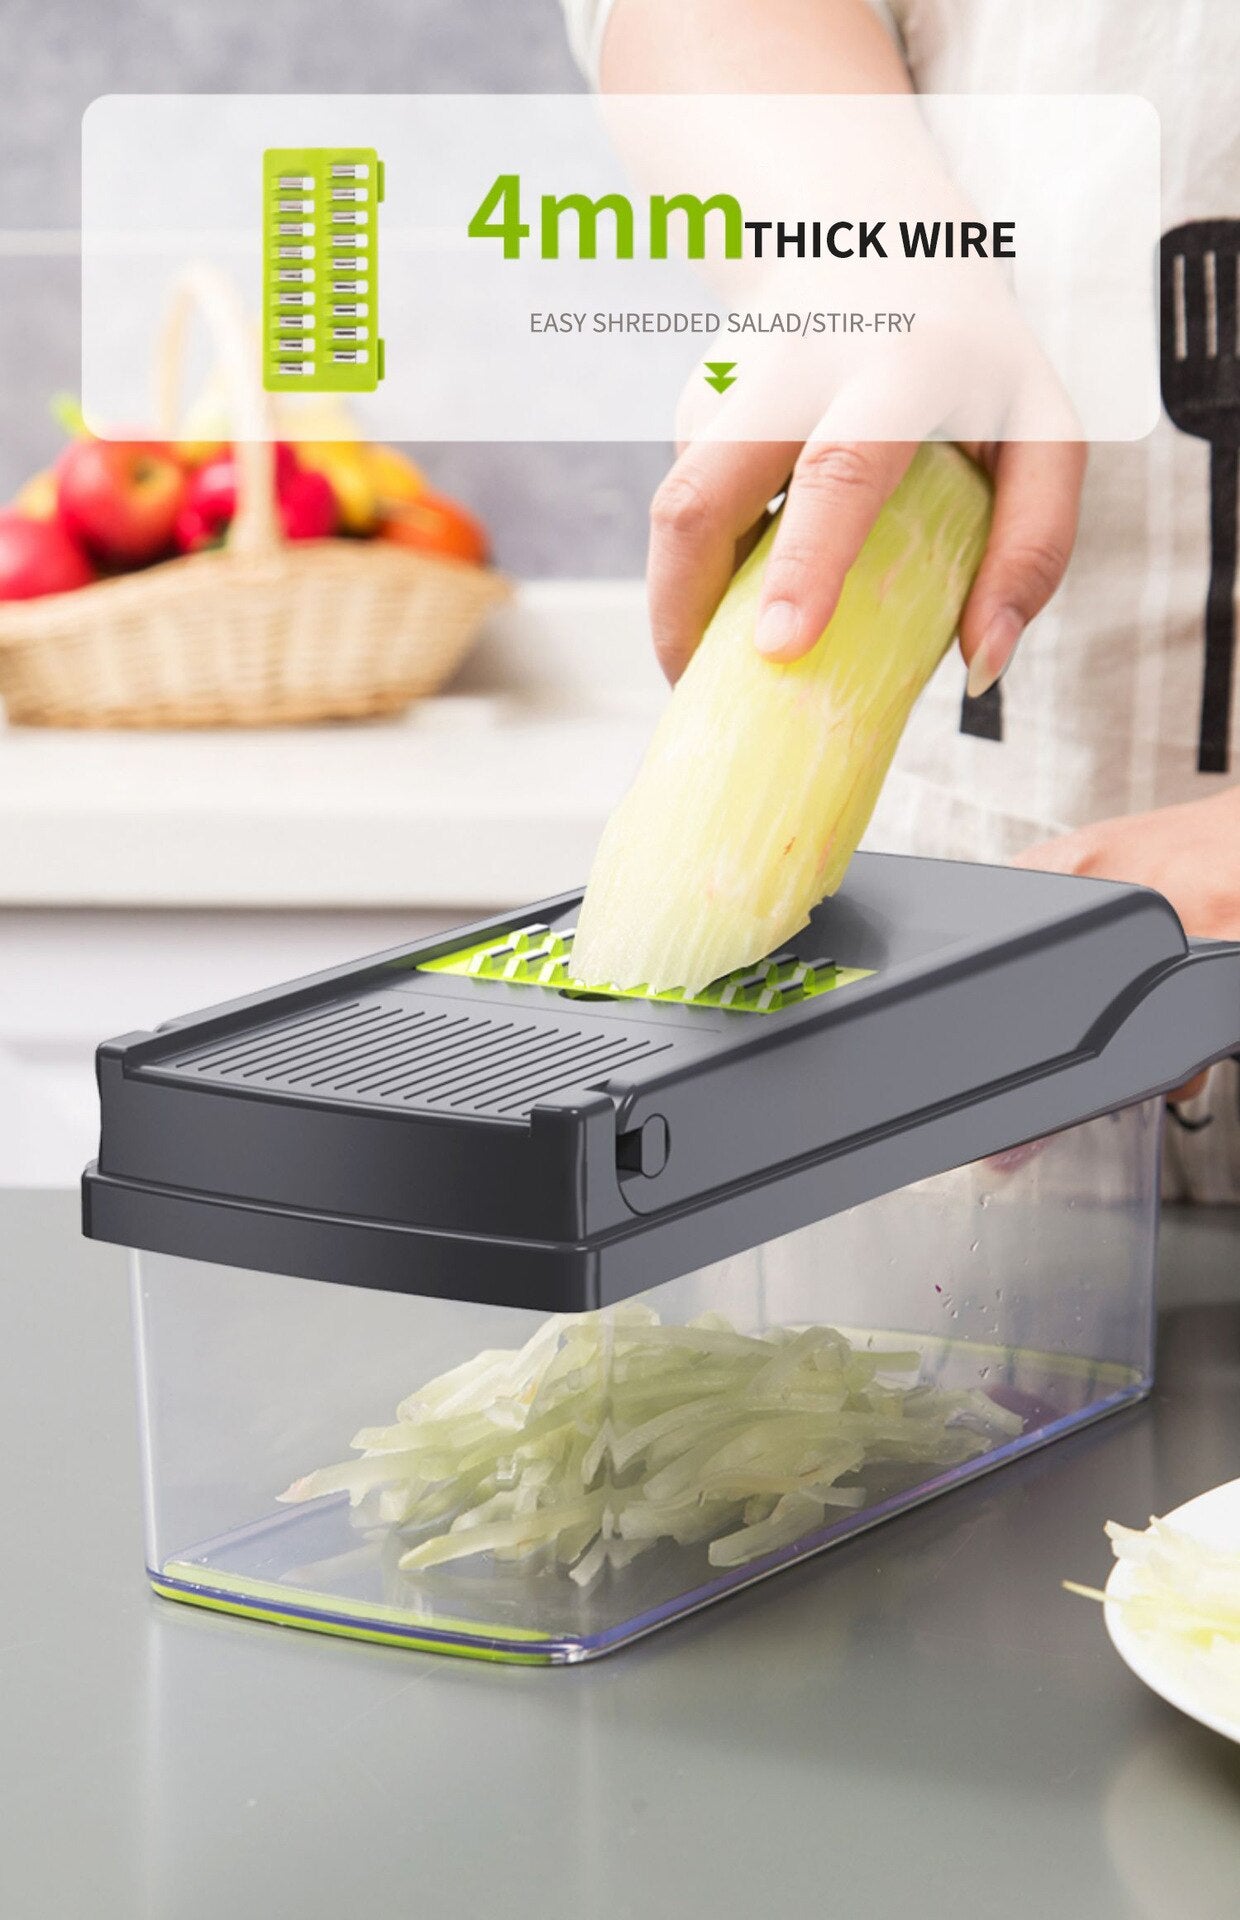 CUTTER MULTIFUNCTIONAL WITH BASKET (12-IN-1) - CUTS, SLICES, BRATES AND MORE